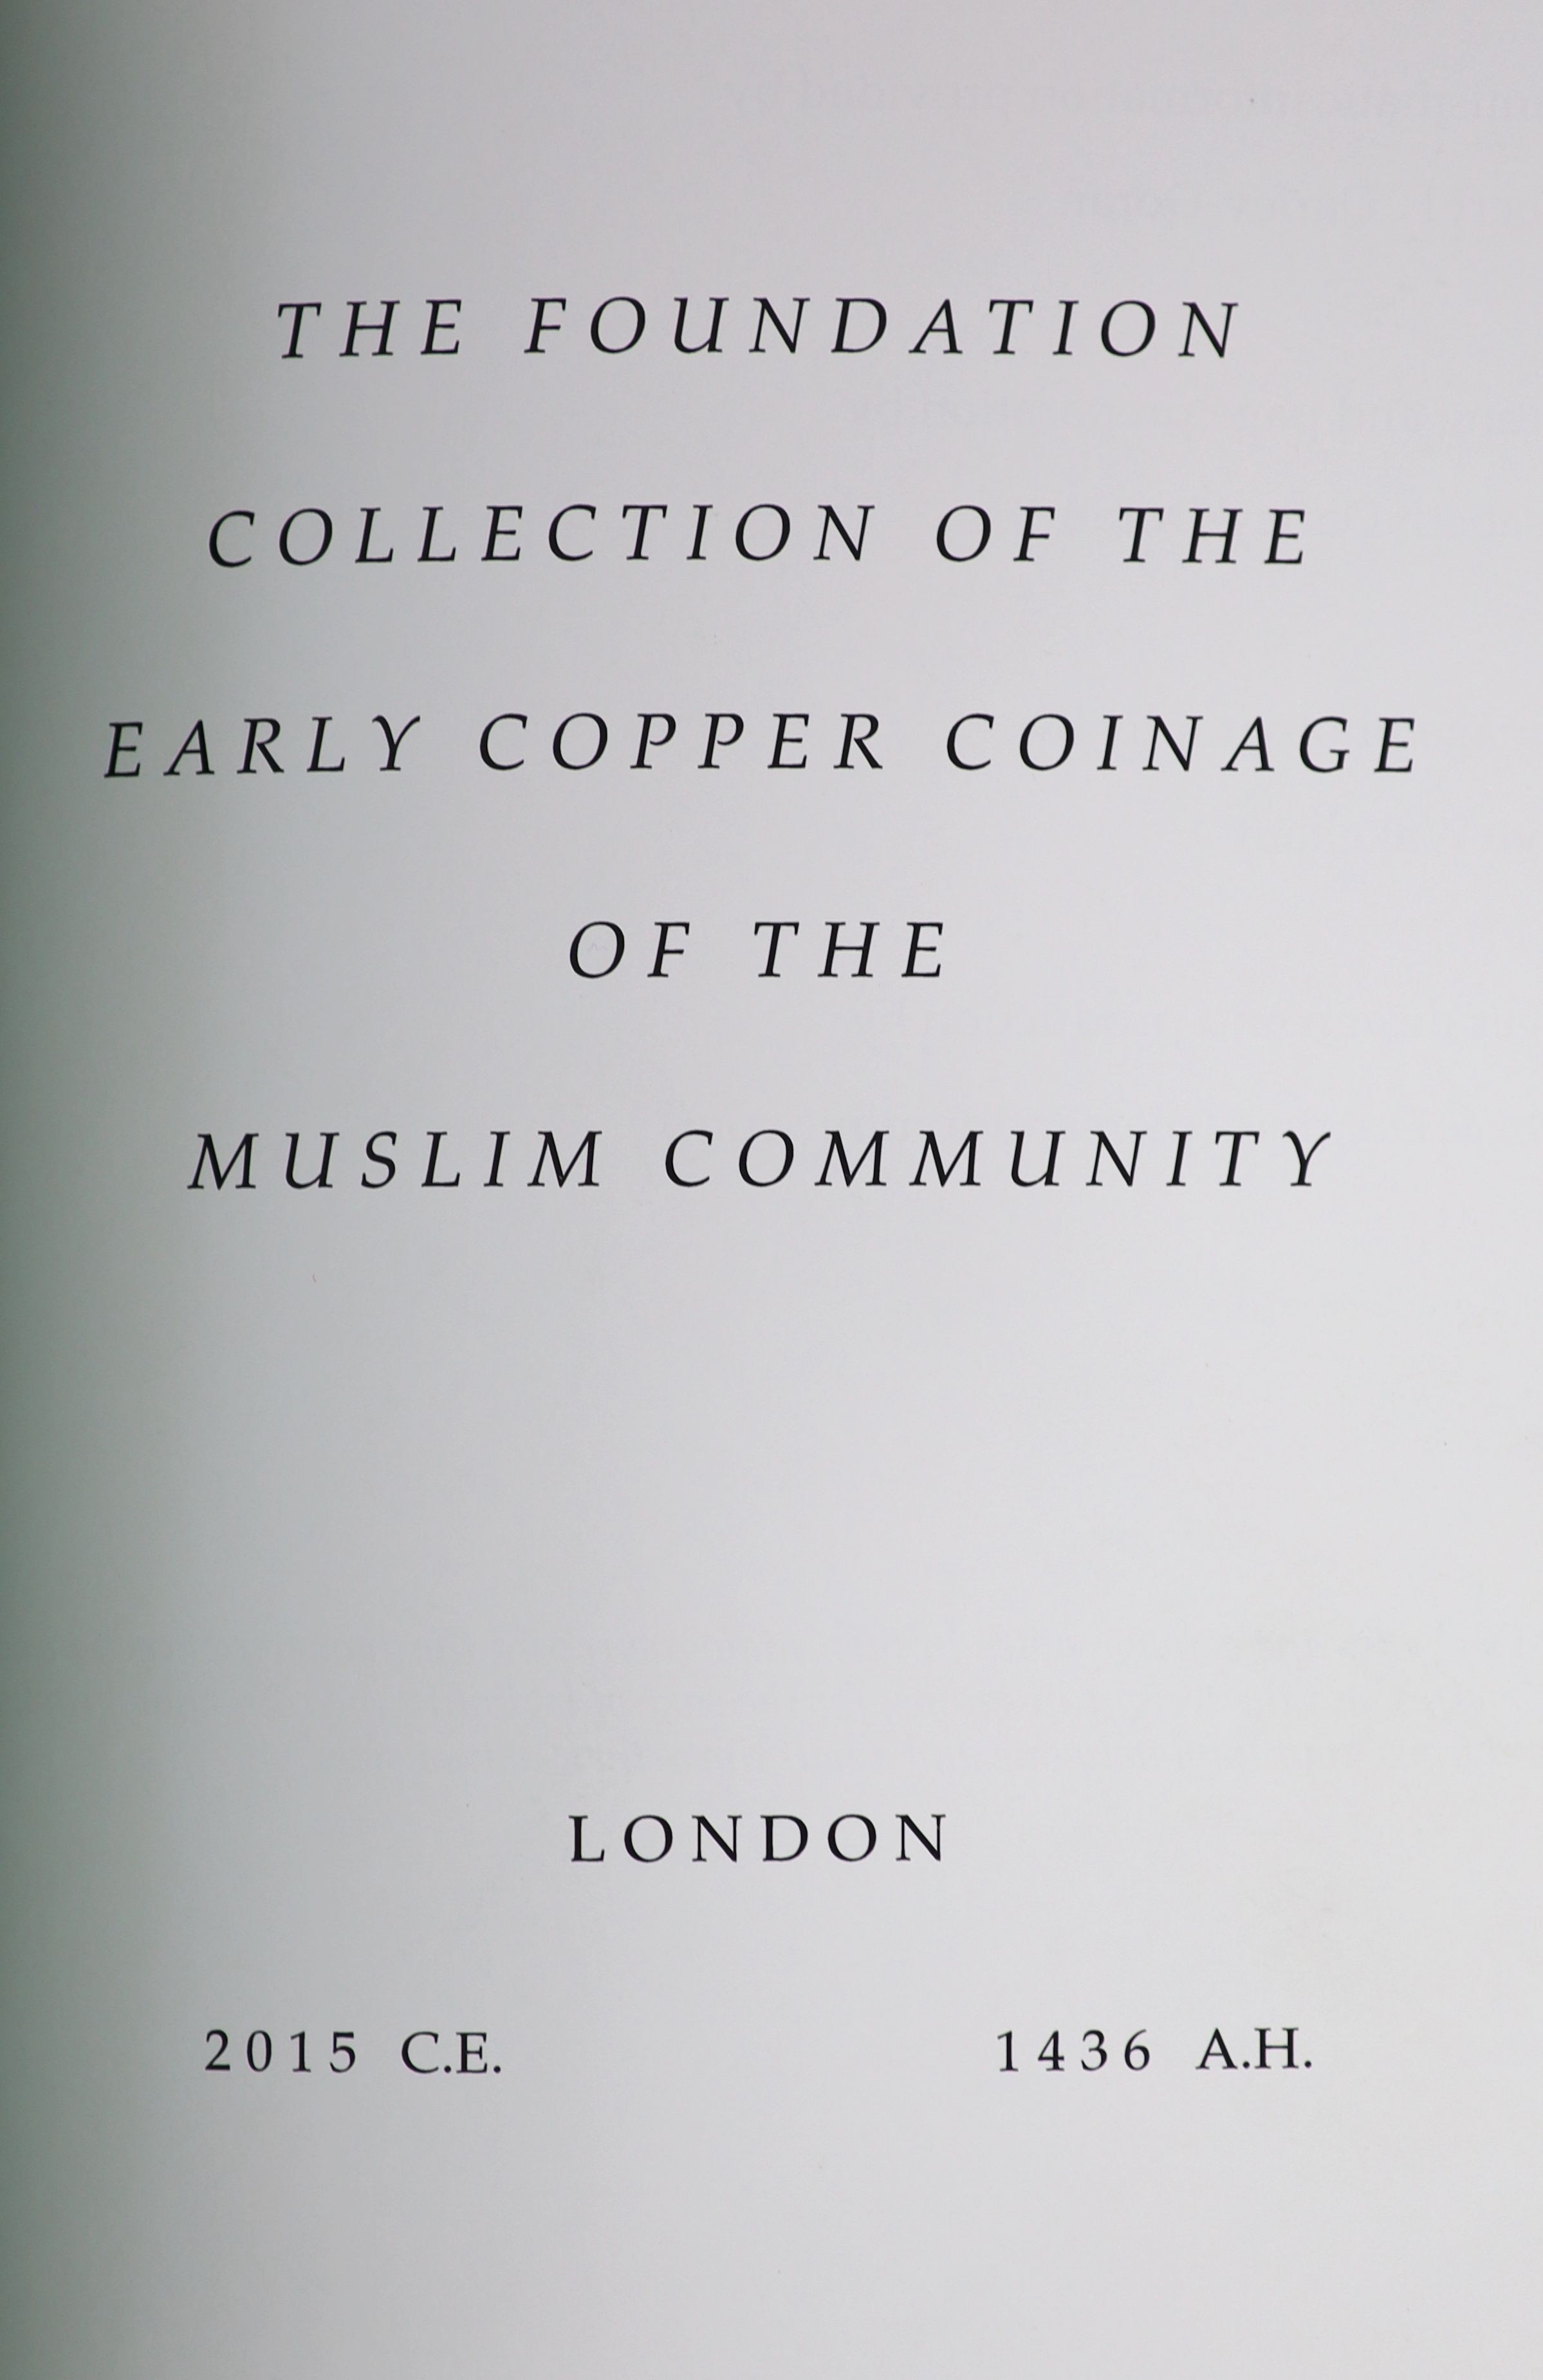 Darley-Doran, Robert E. [Et. Al.] The Foundation Collection of the Early Copper Coinage of the Muslim Community. Two volumes, London, 2015. Original cloth bindings, slightly rubbed, small tear to lower outer hinge of vol